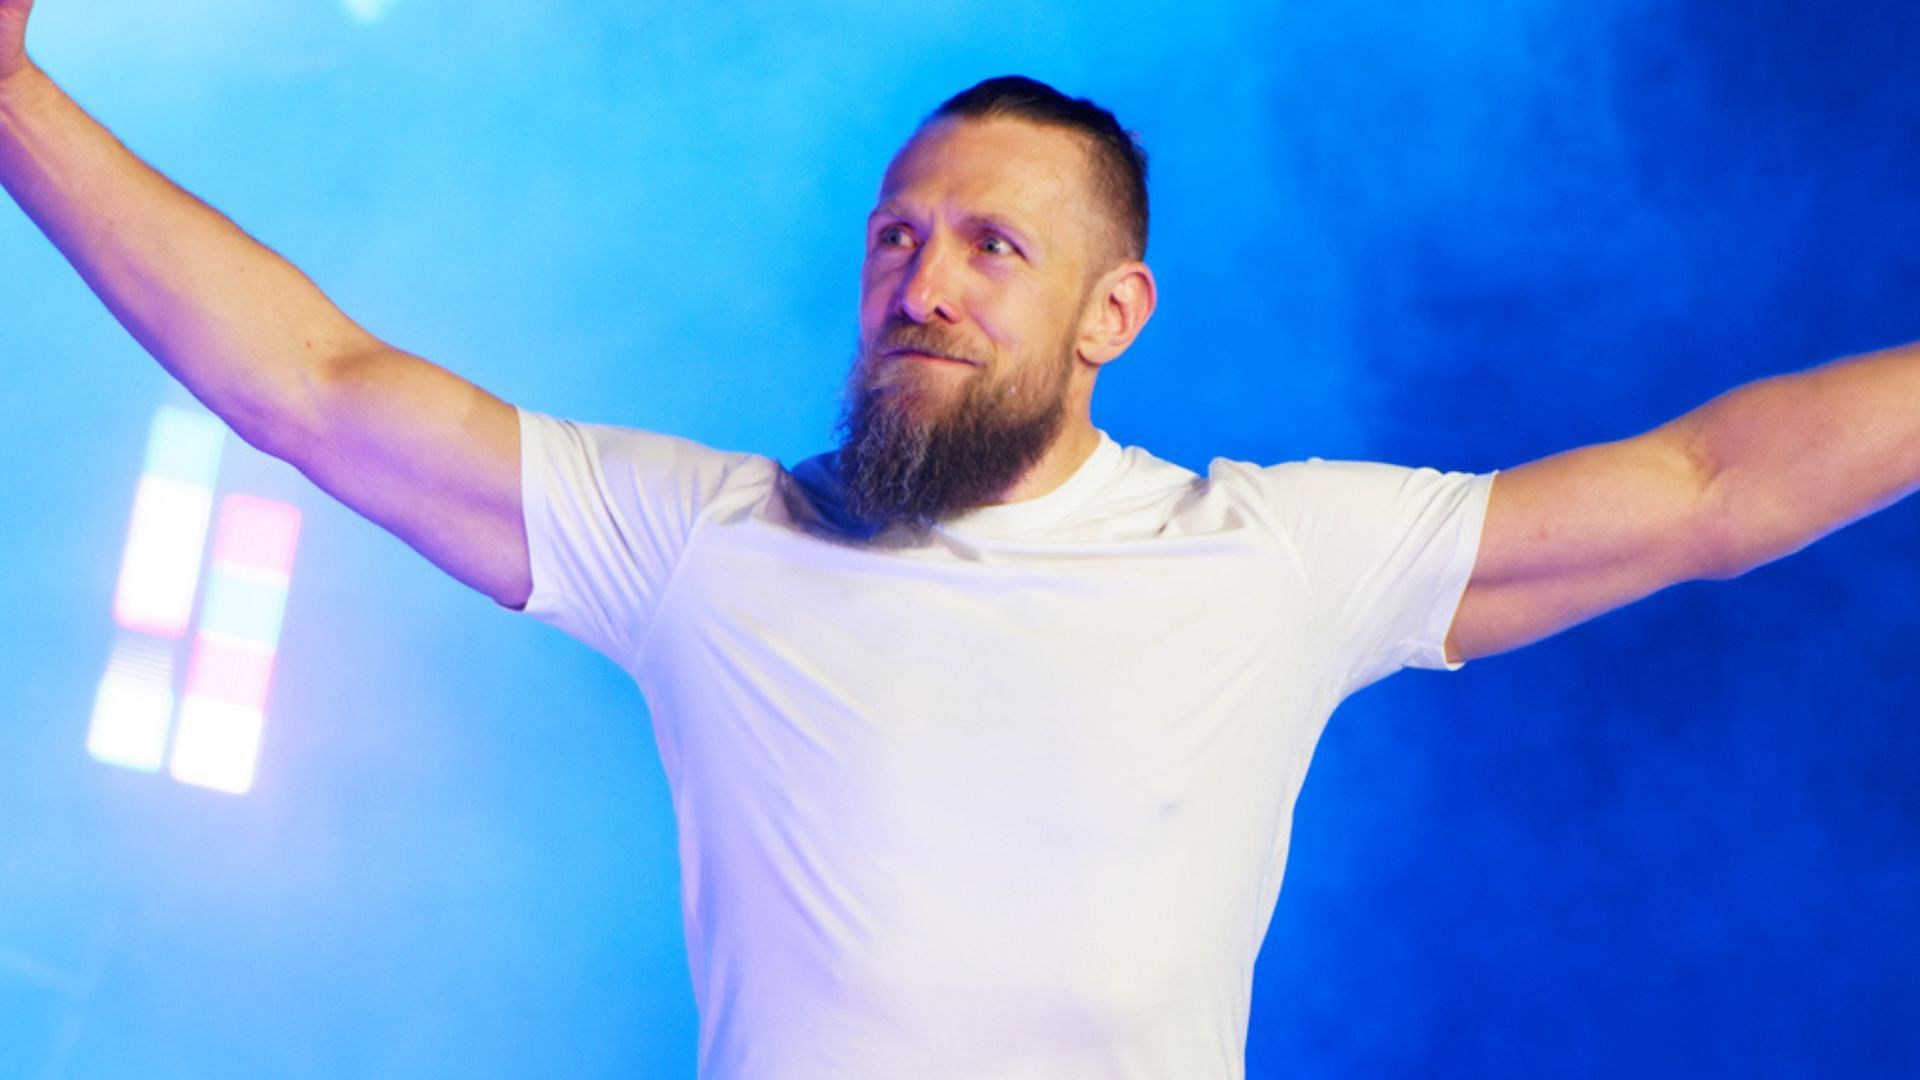 Could Bryan Danielson finally get his hands on one of his dream opponents?